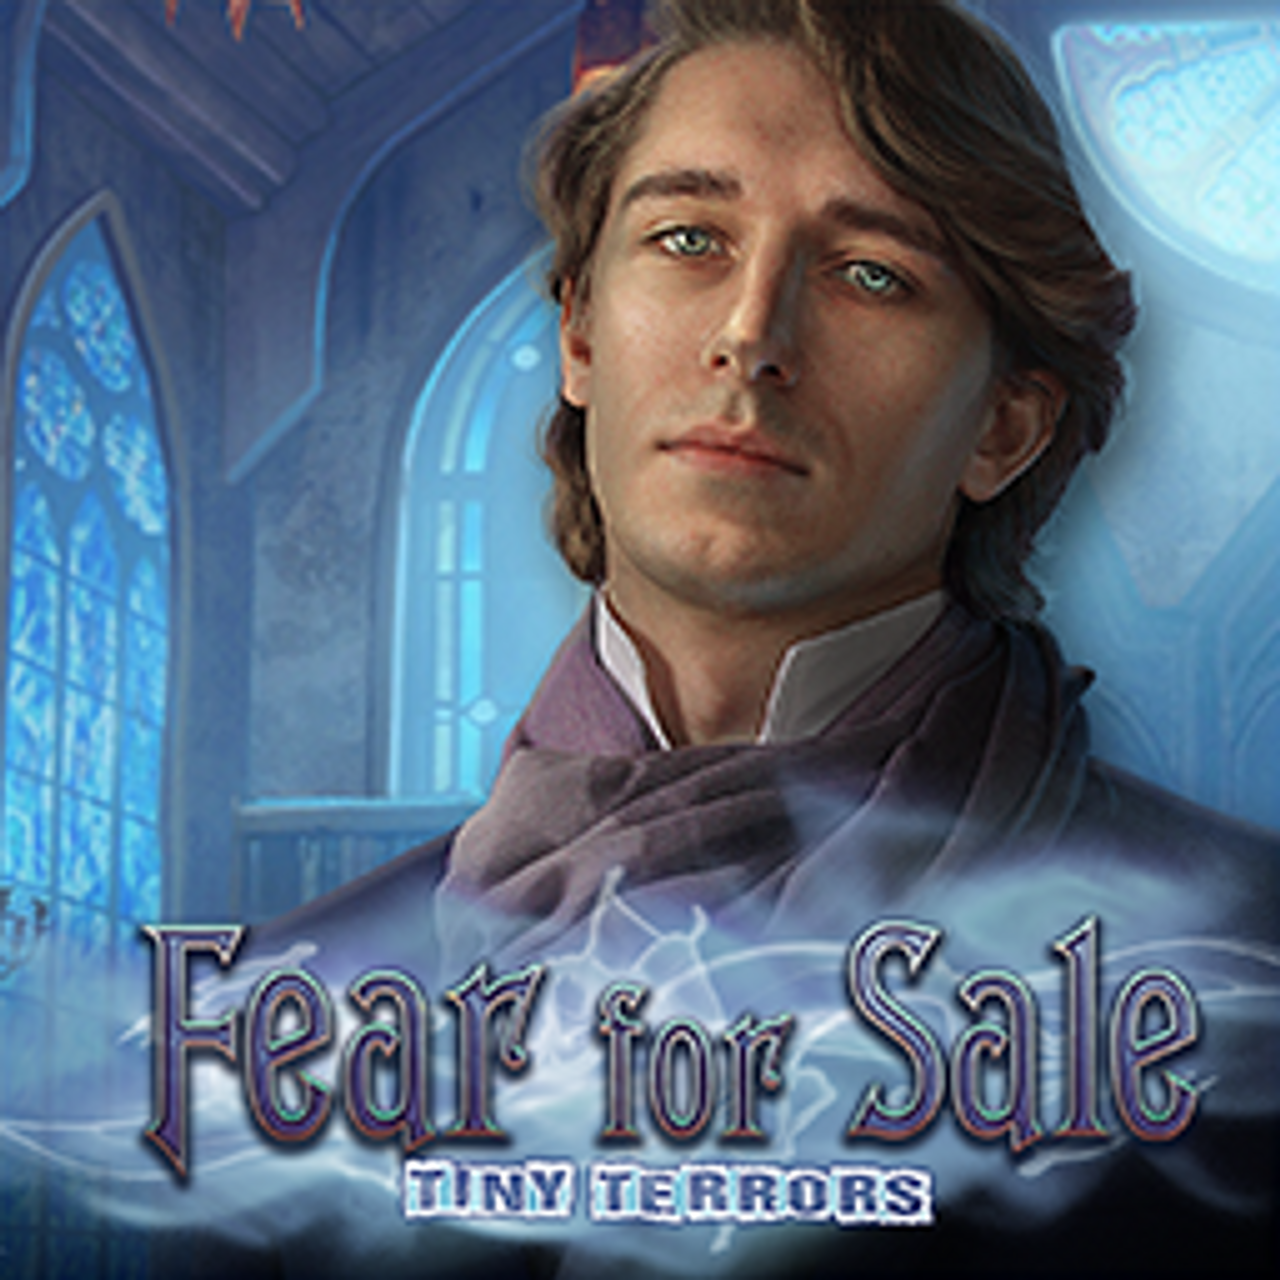 Fear for Sale: Tiny Terrors